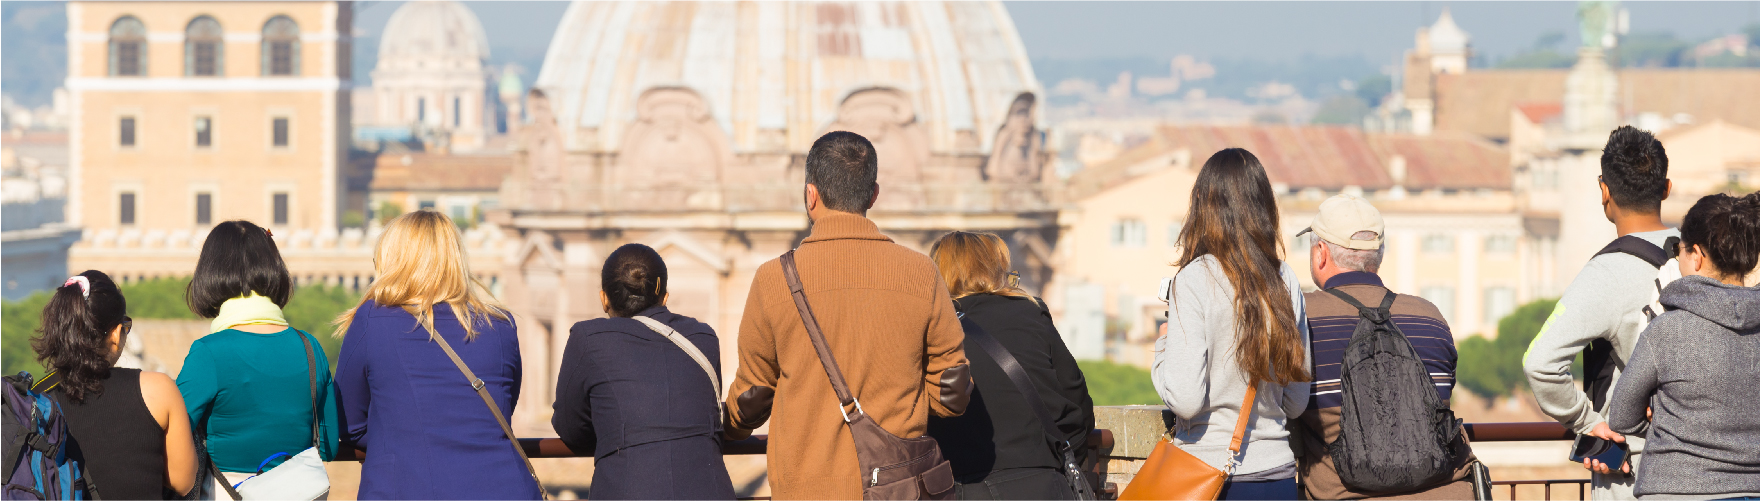 The wait is over!
2023 Italy Escorted Tours are available now!